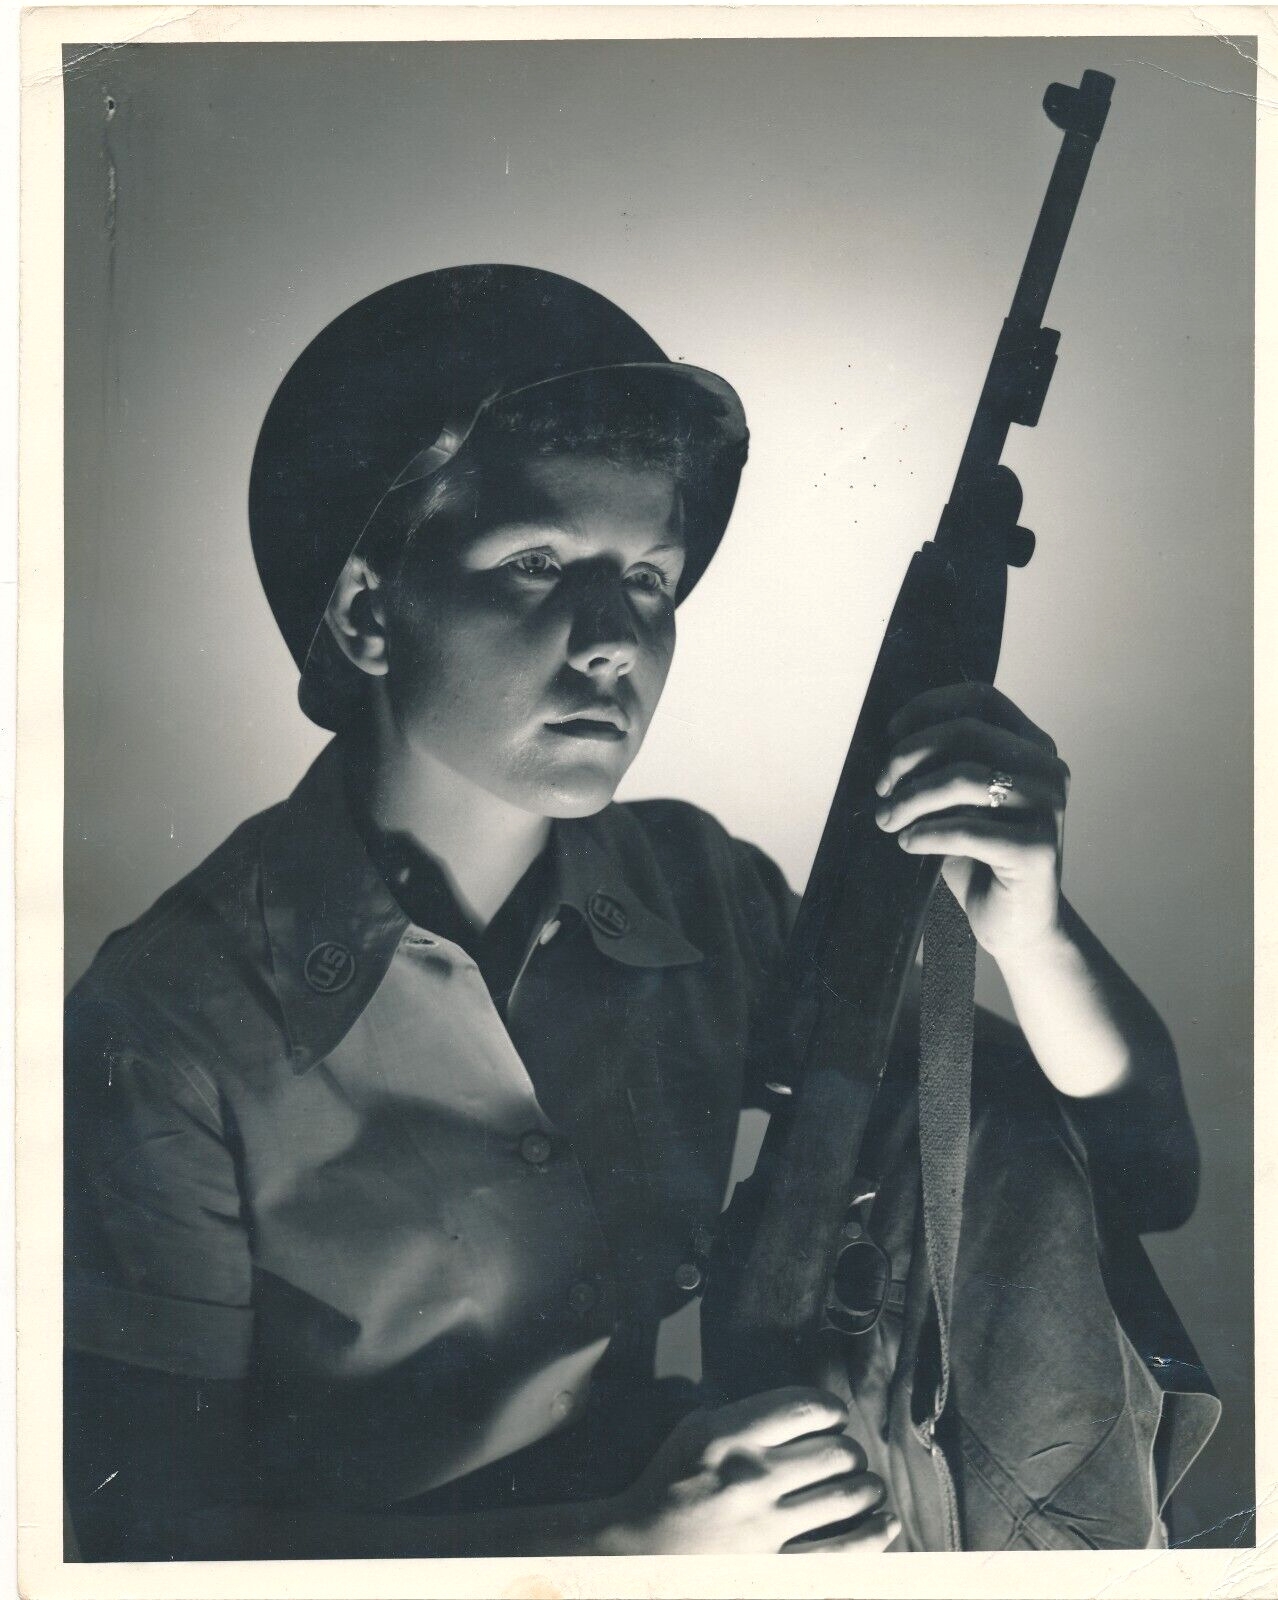 Vintage WWII Photo - Boy Face American Soldier, Kid with a Rifle 8x10